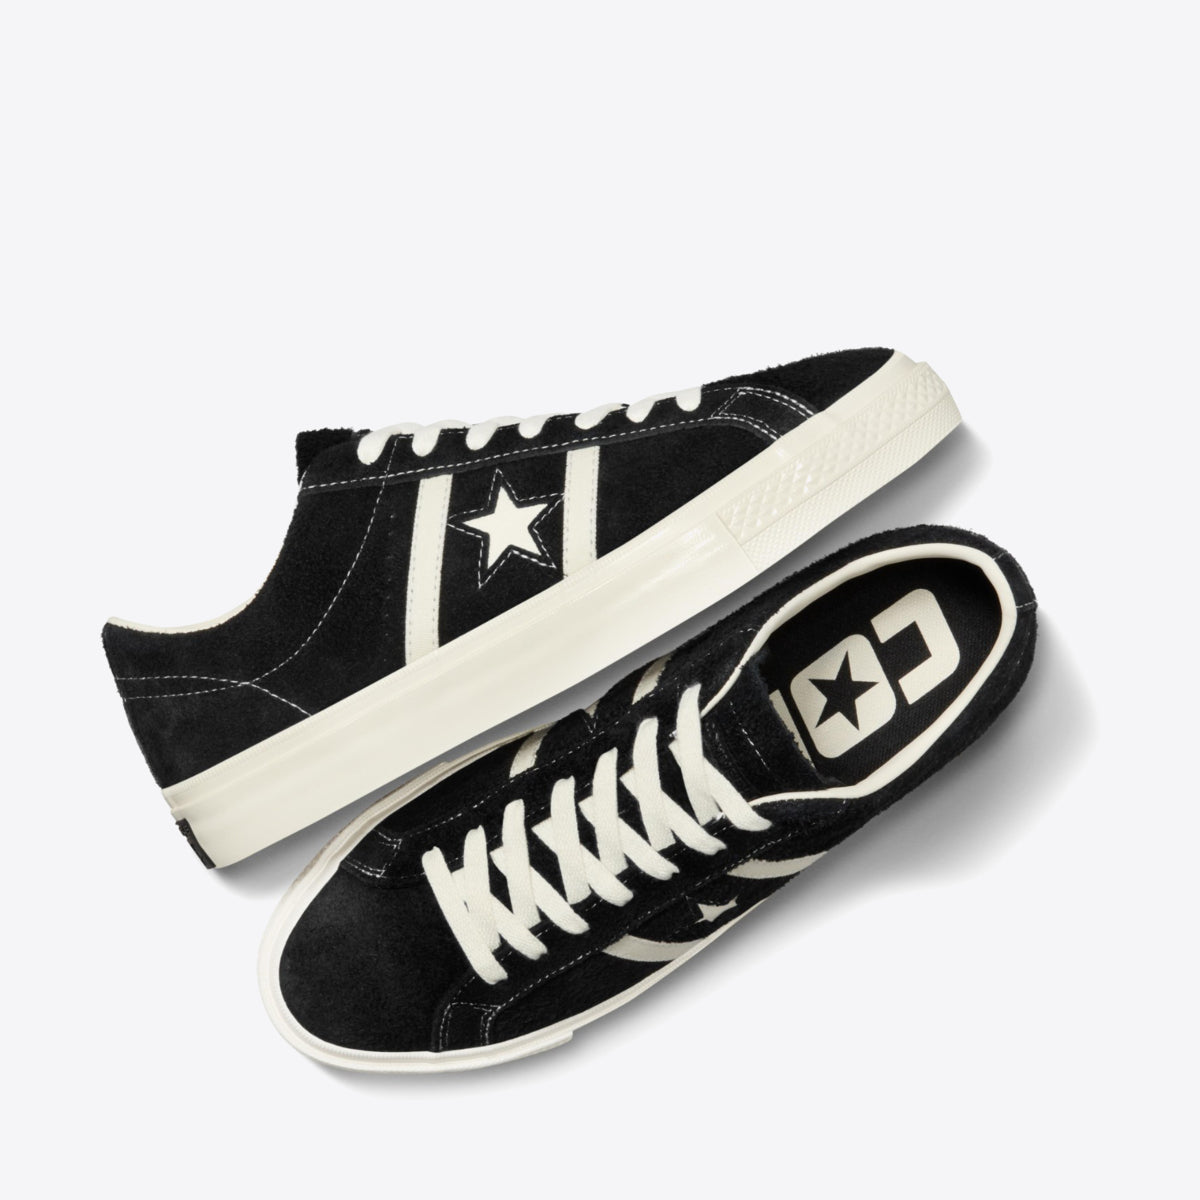 CONVERSE One Star Academy Pro Low Black/Egret - Image 4